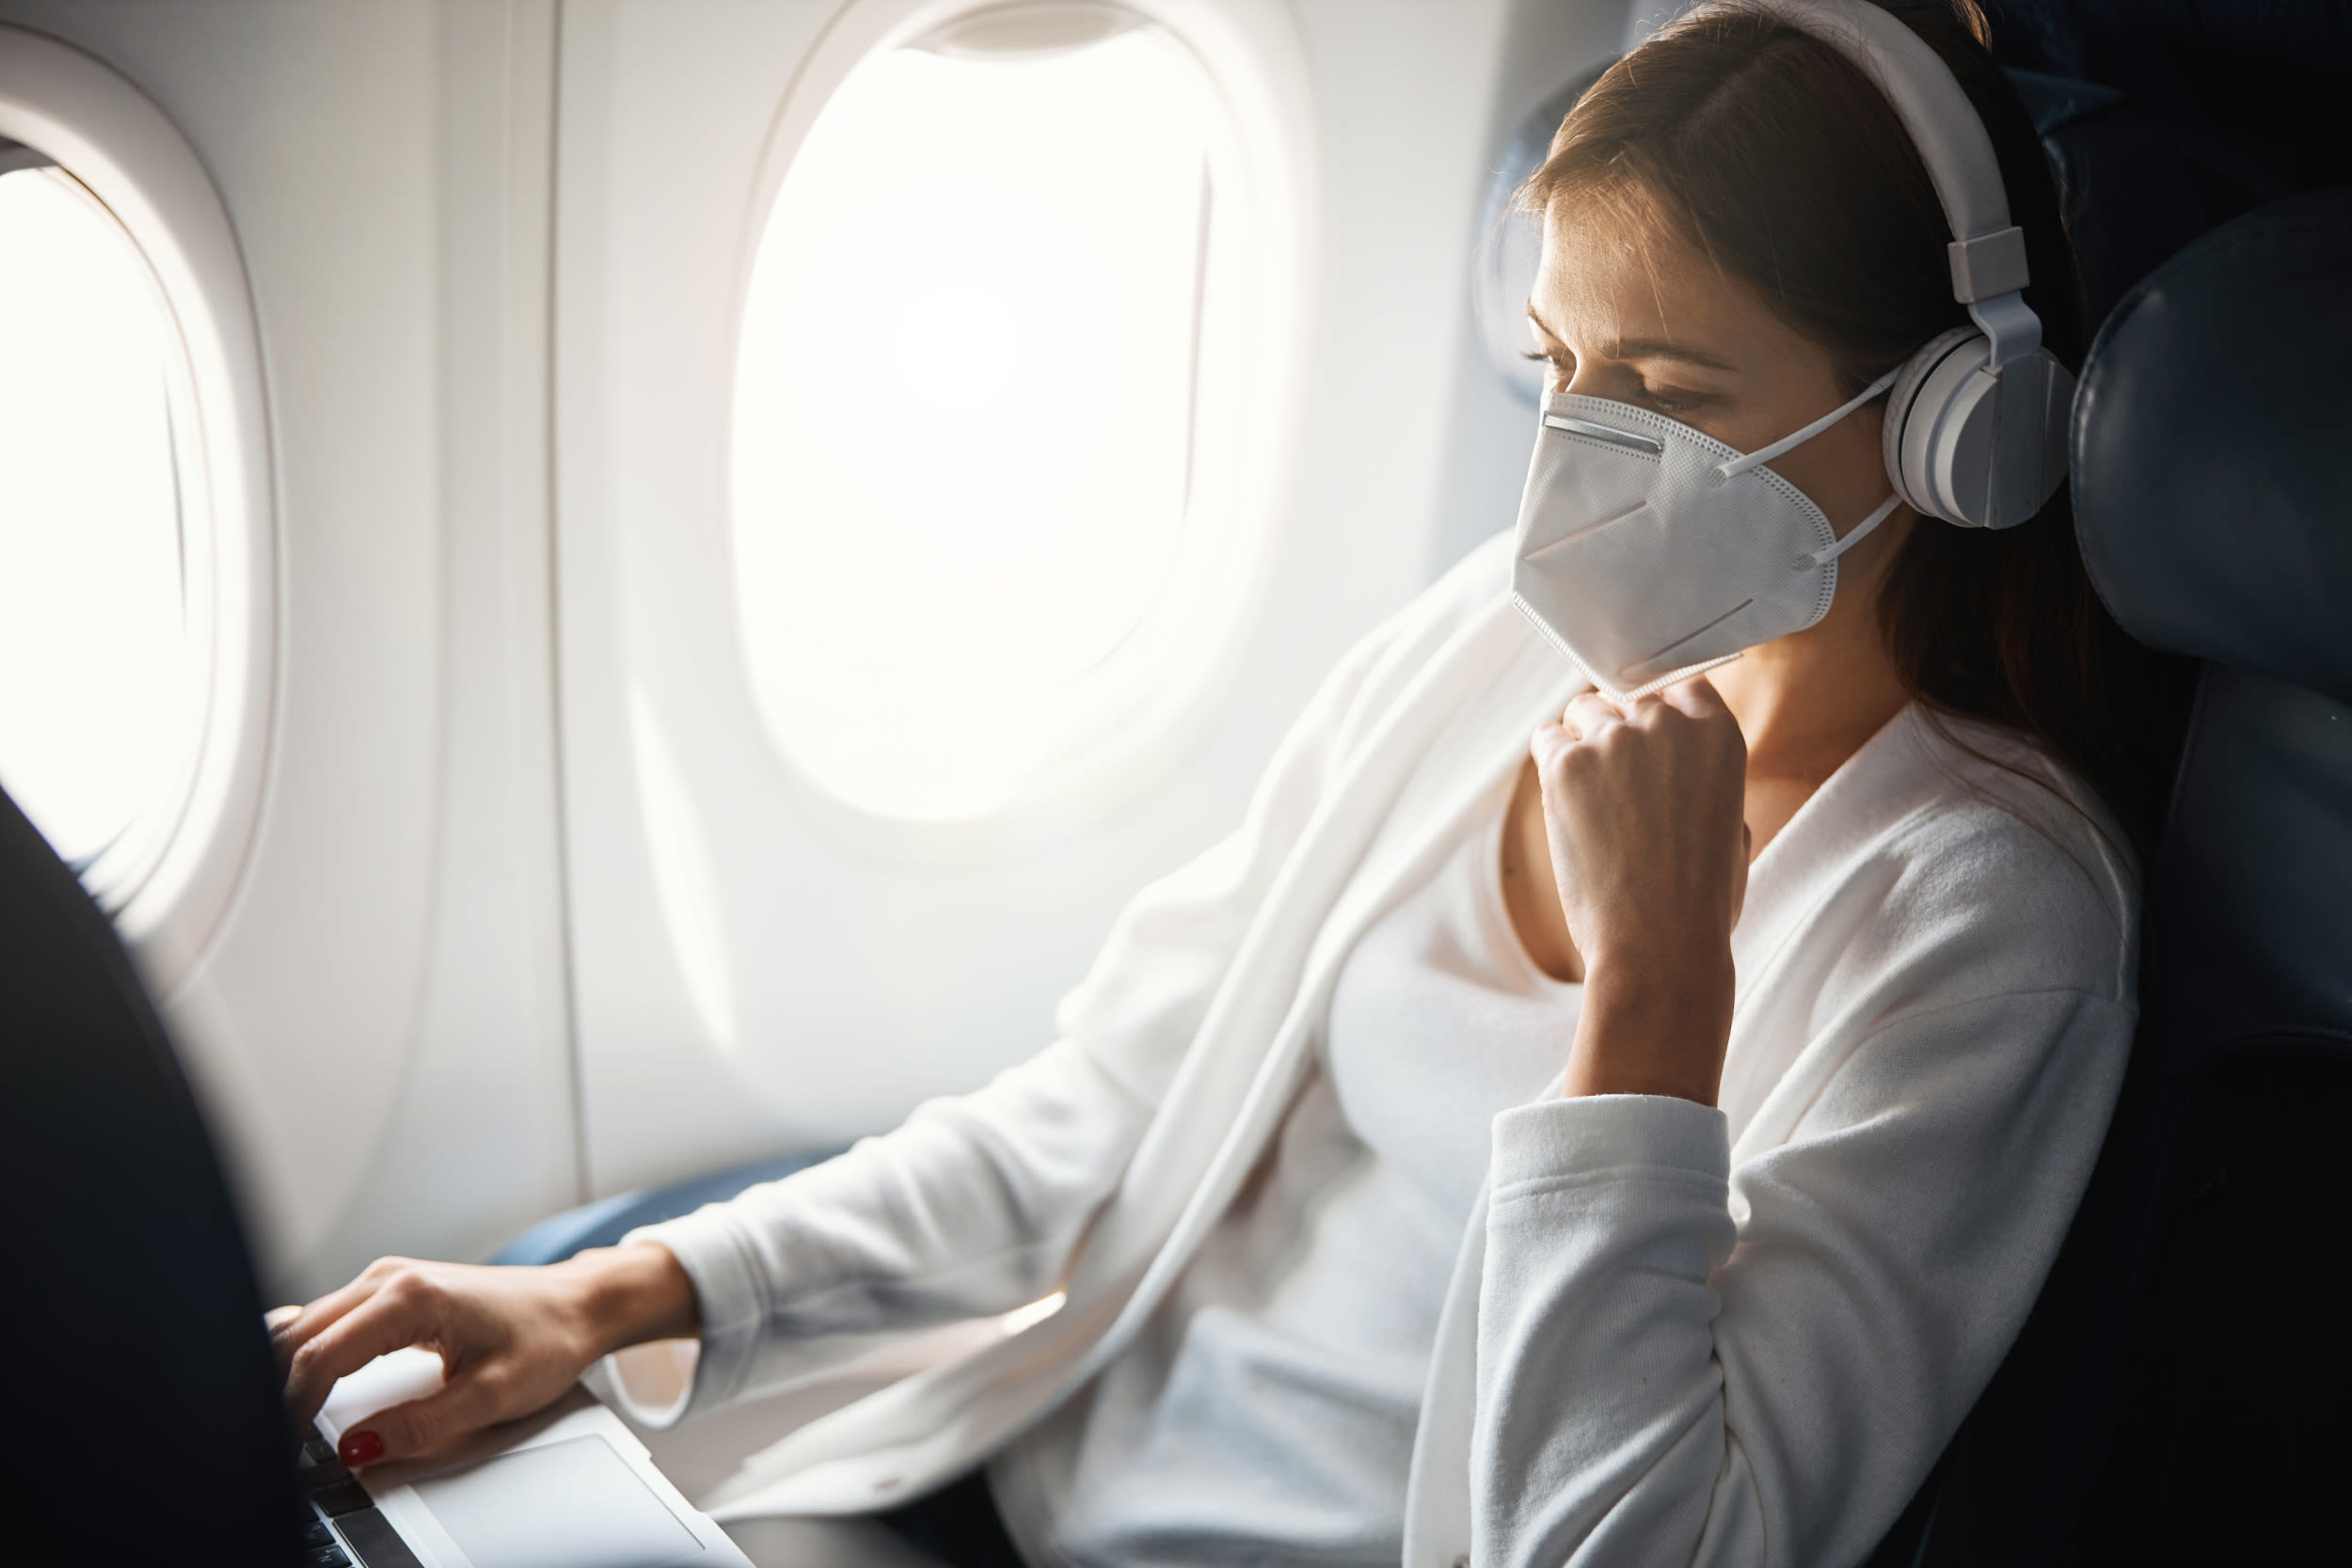 Woman wearing face mask on flight for kindest reason: "Don't judge"